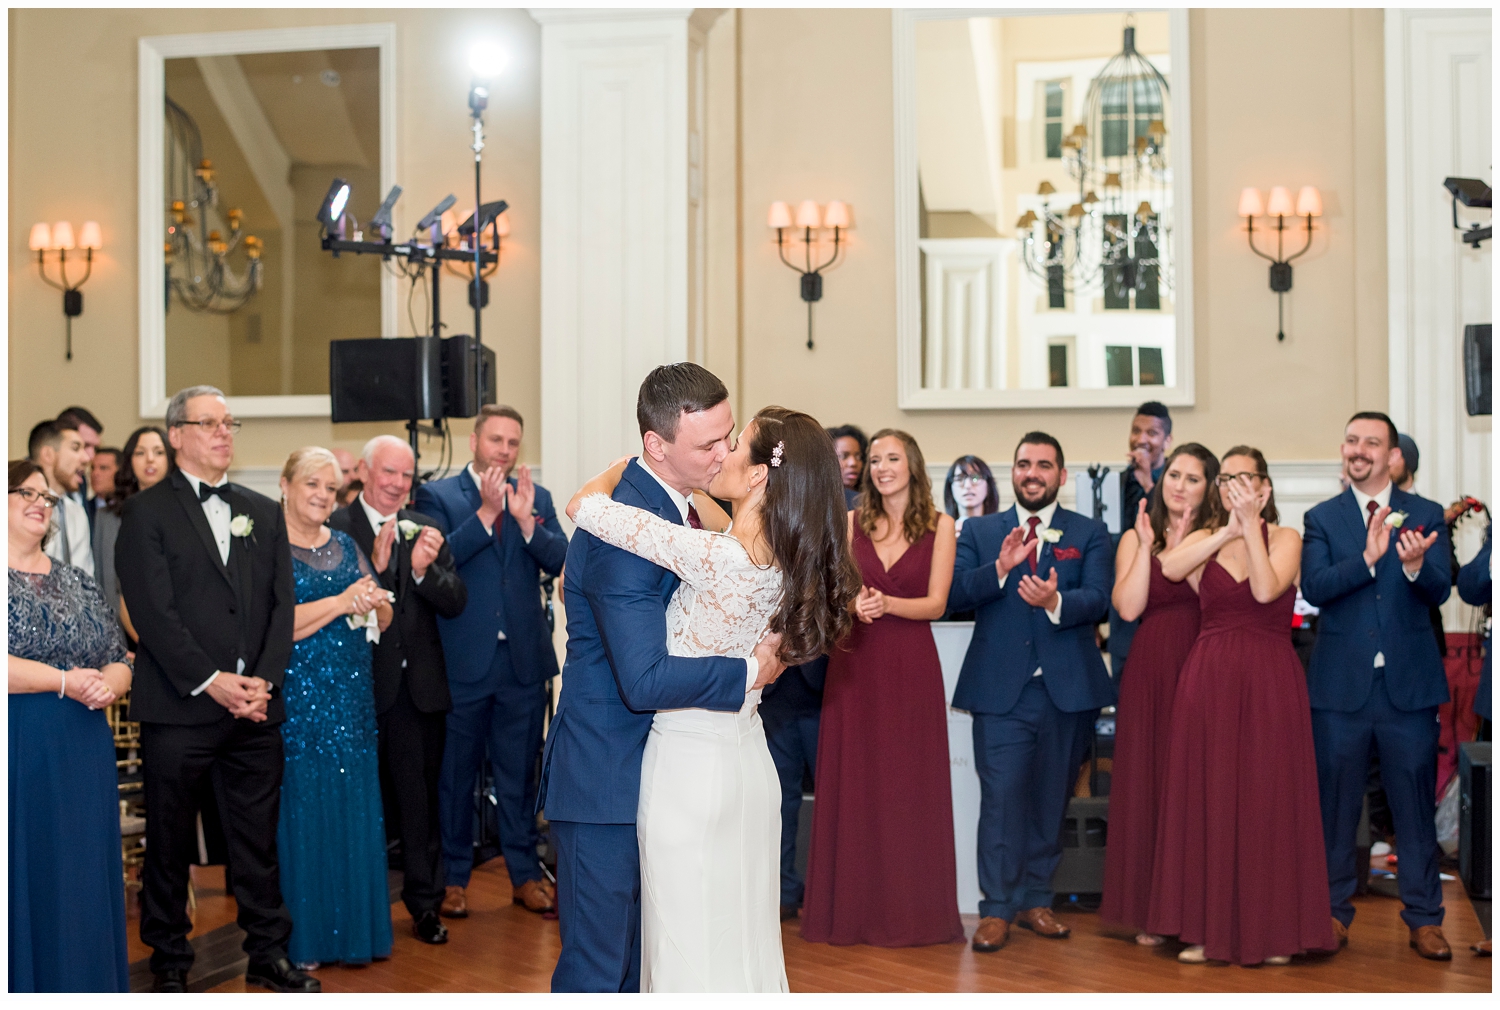 bride and groom's first dance at their wedding